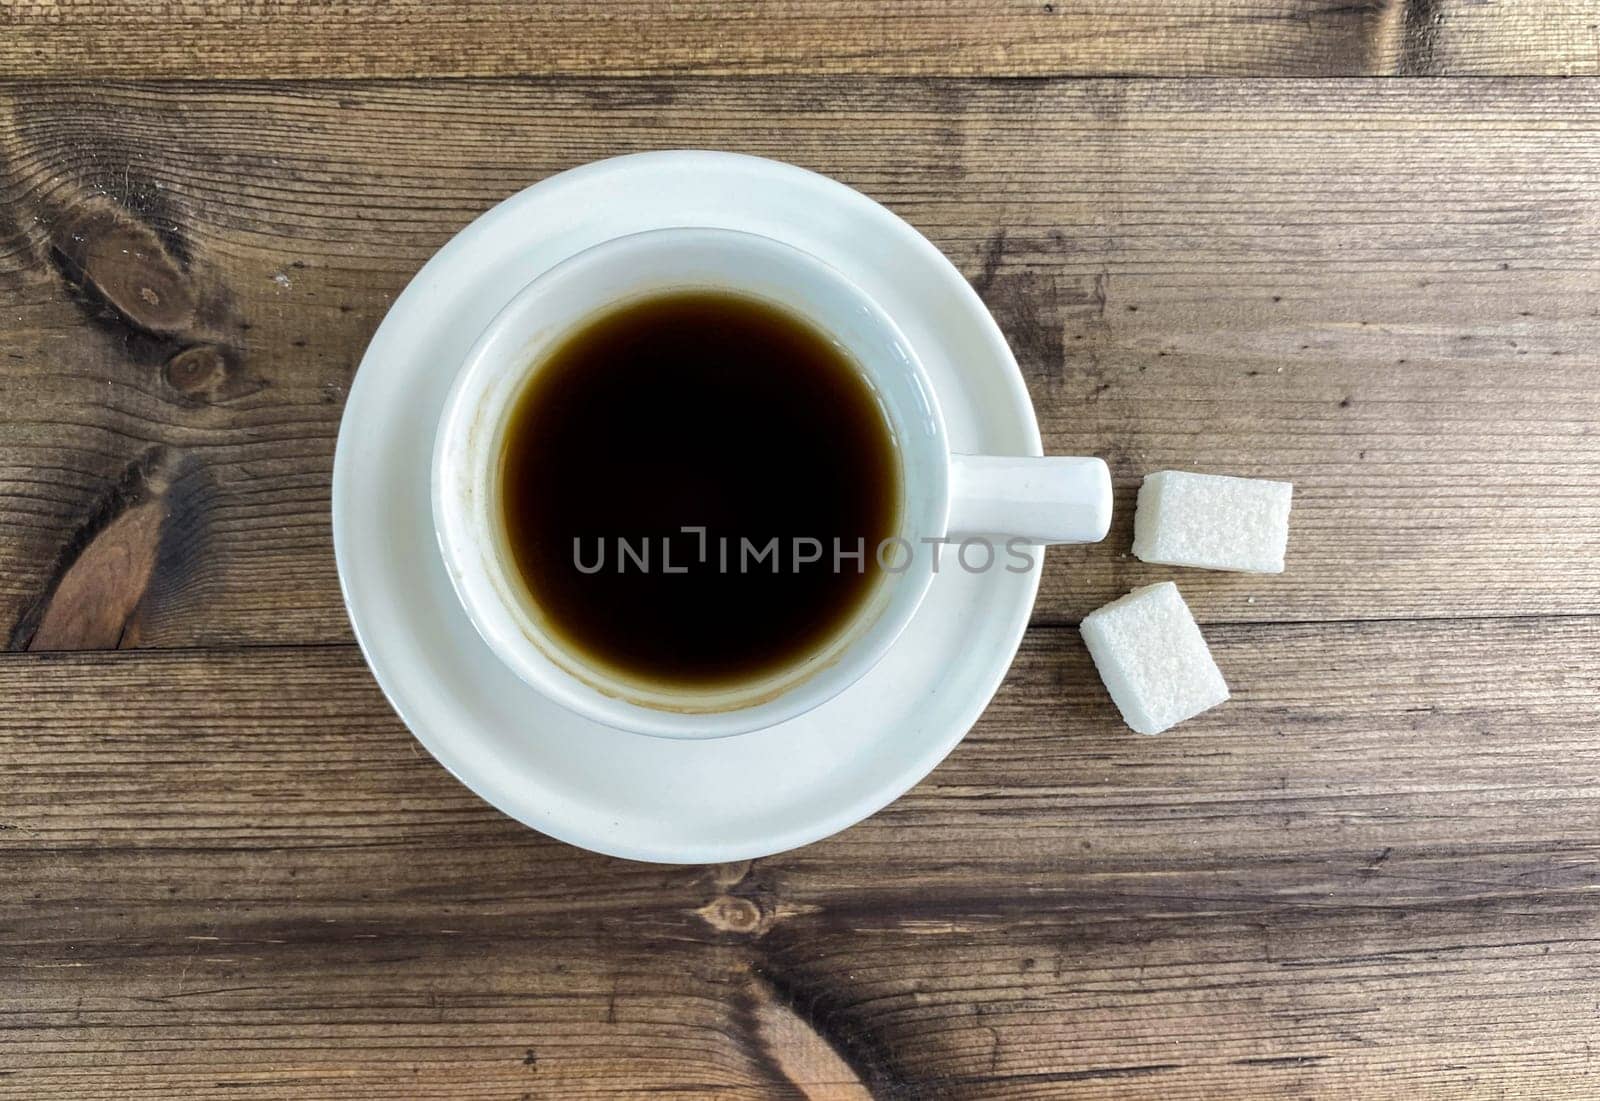 Coffee in a cup and sugar on the table, top view. Coffee in a cup with saucers and sugar on a wooden table.